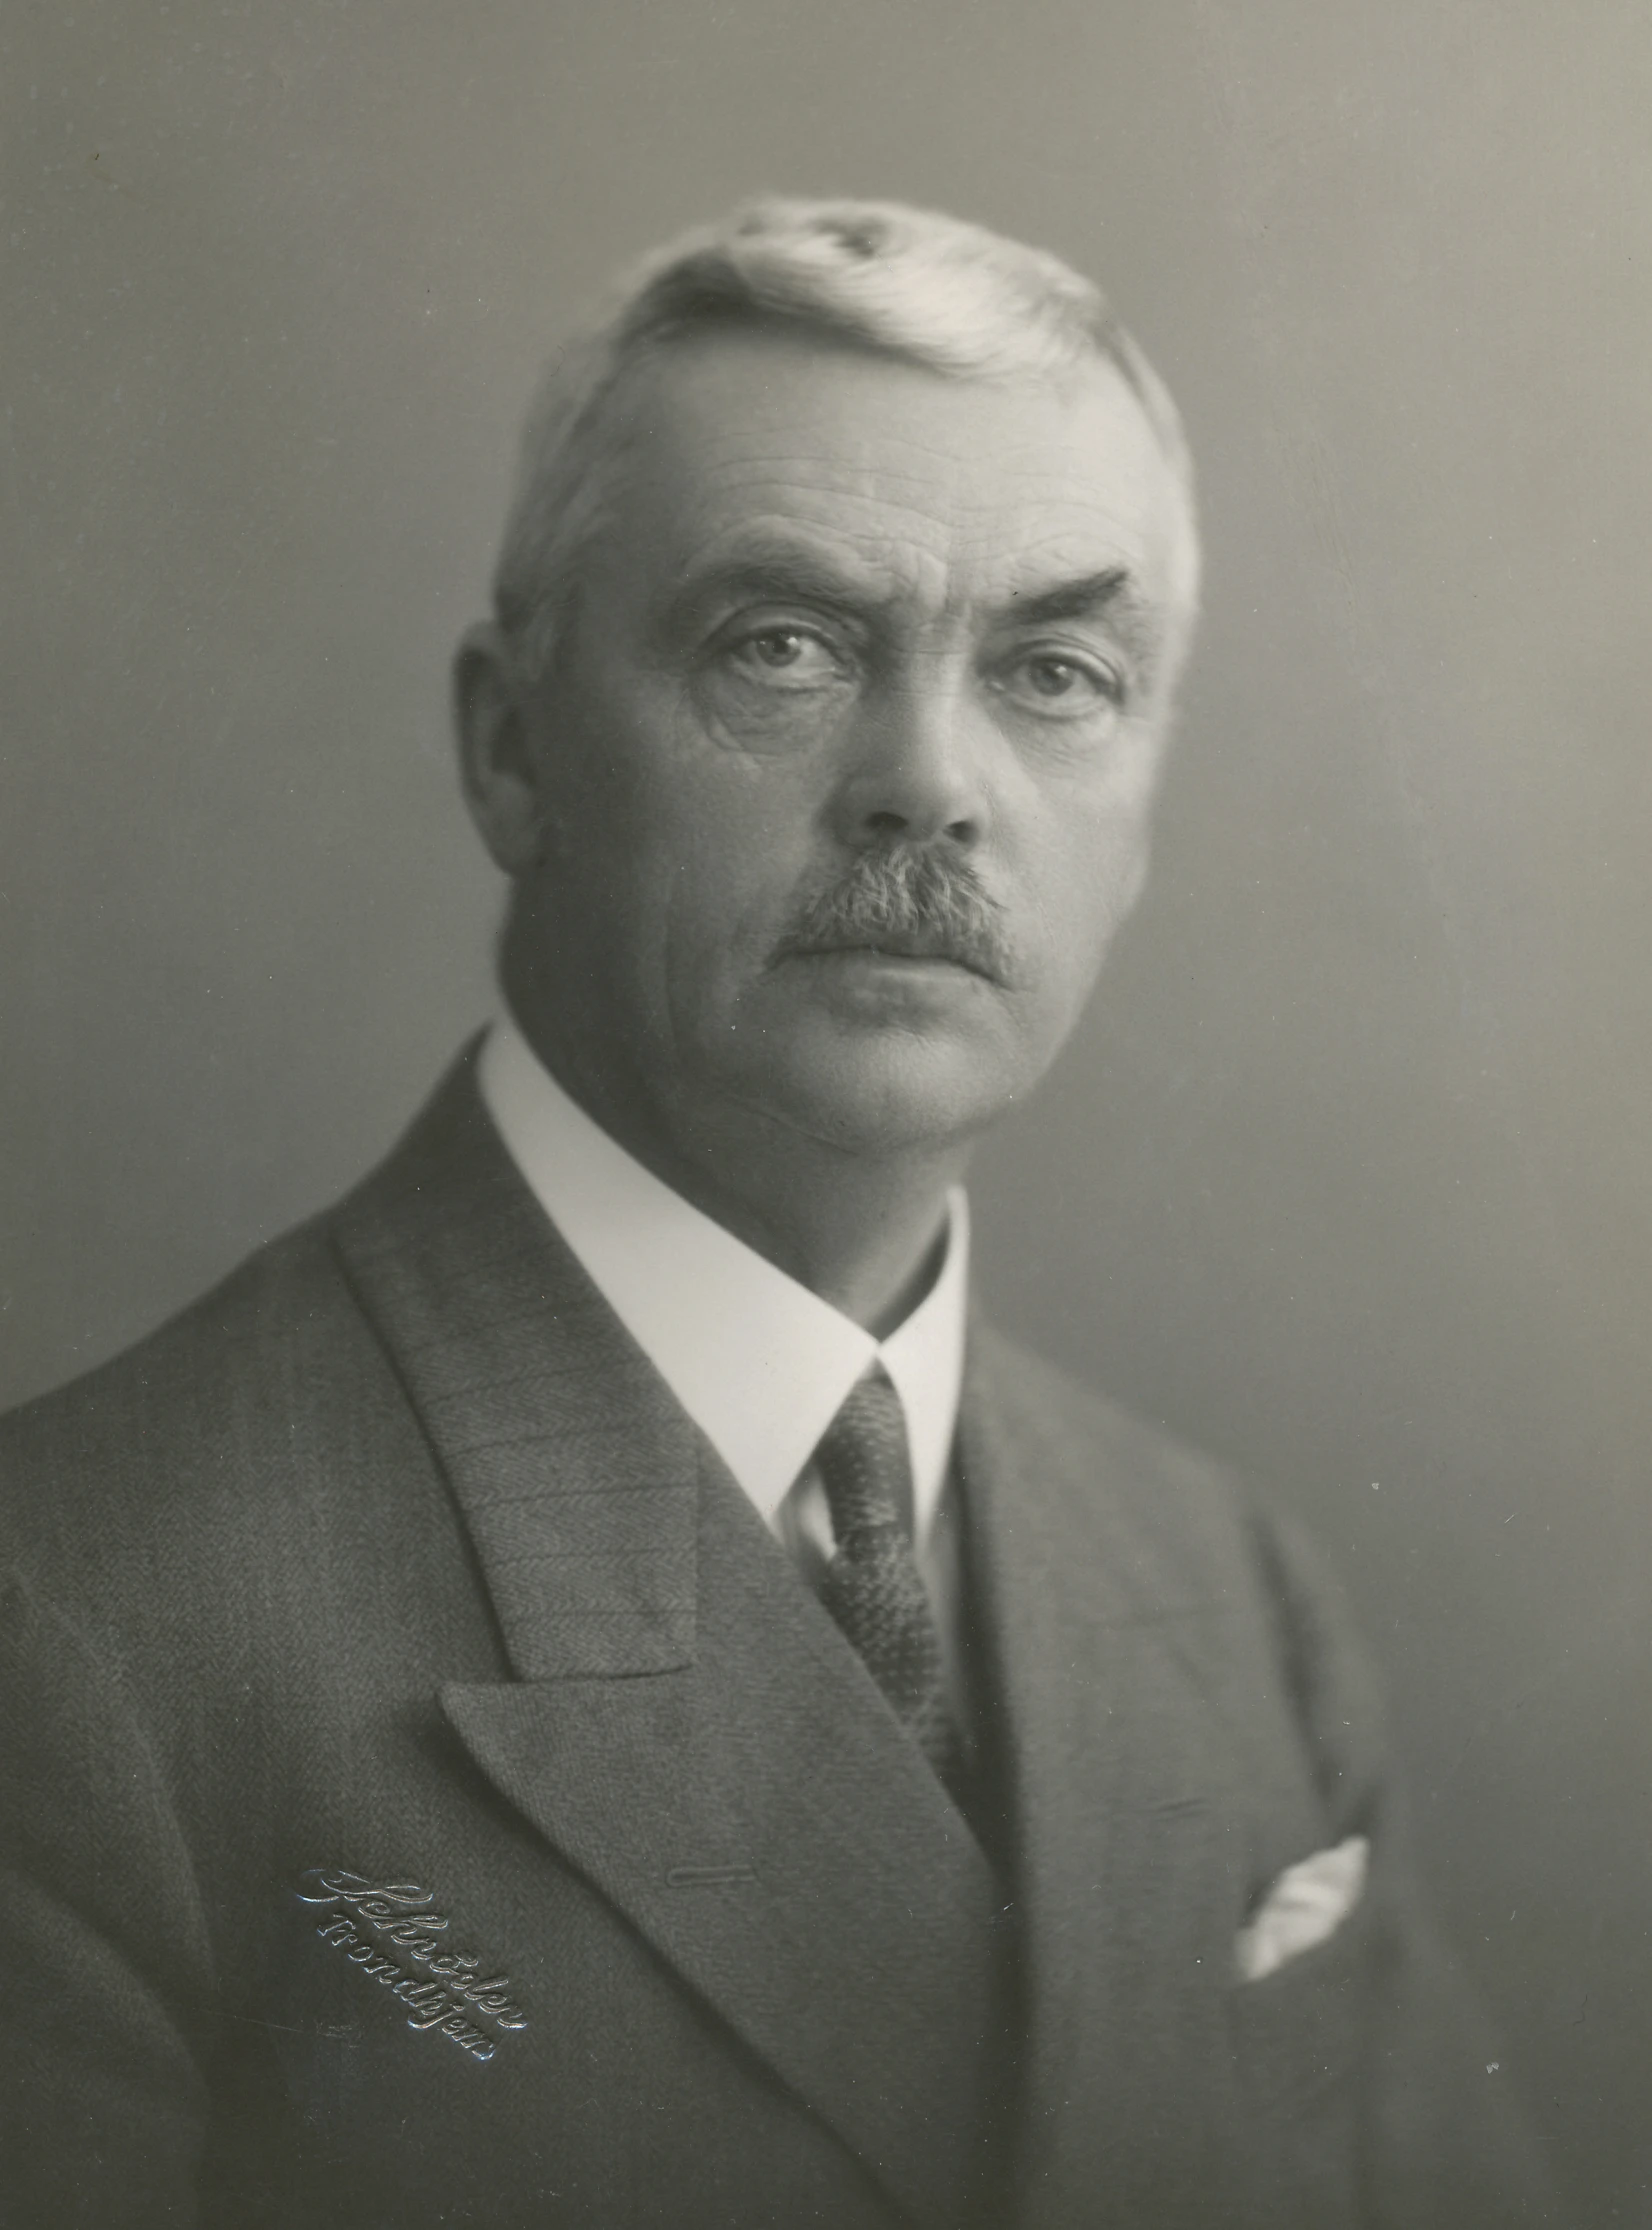 an old fashioned portrait of a man in a suit